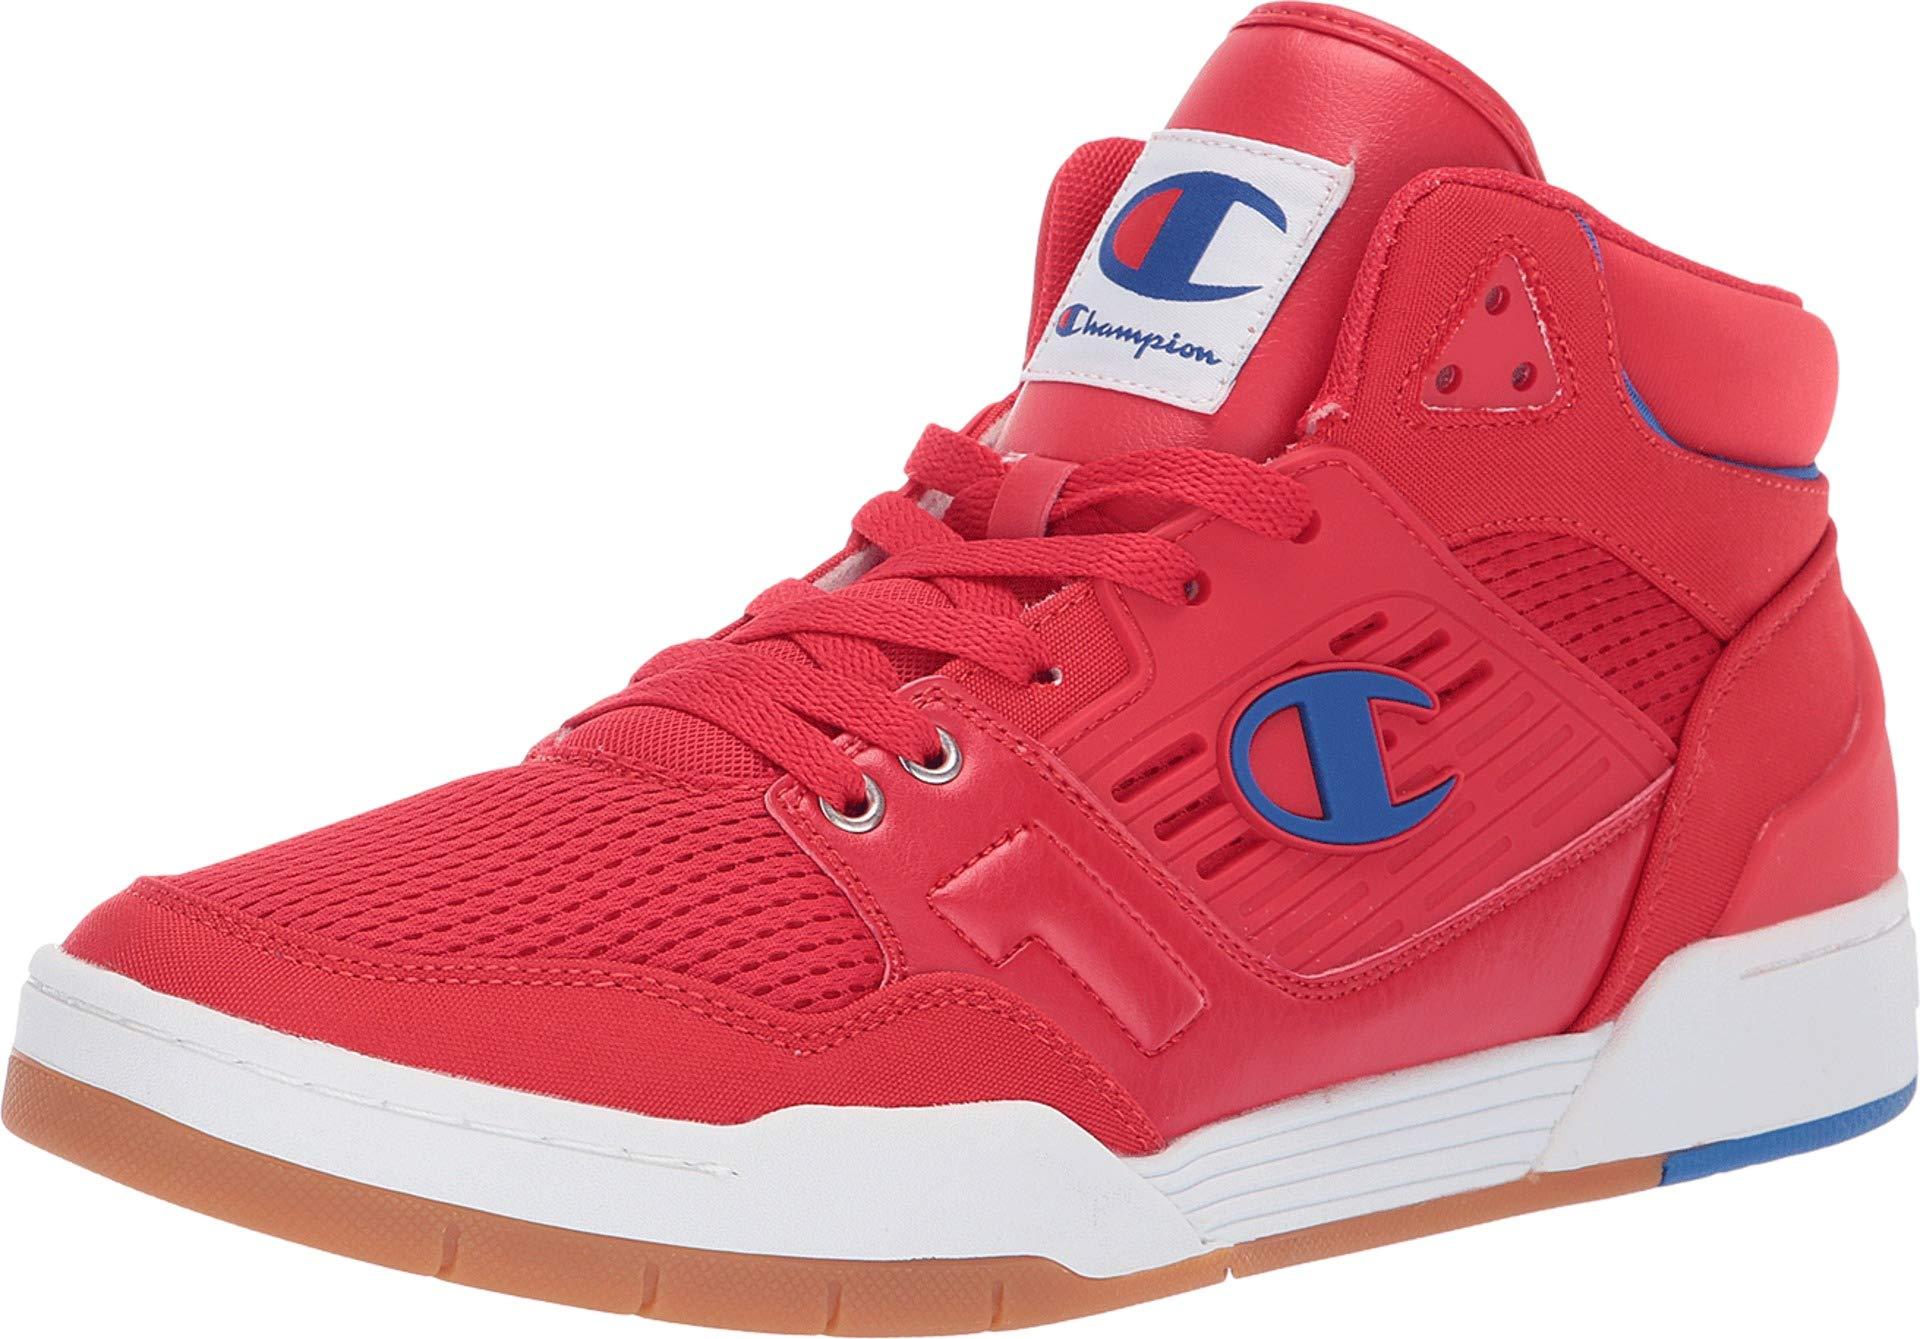 Champion Synthetic 3 On 3 Sp in Red for Men - Lyst